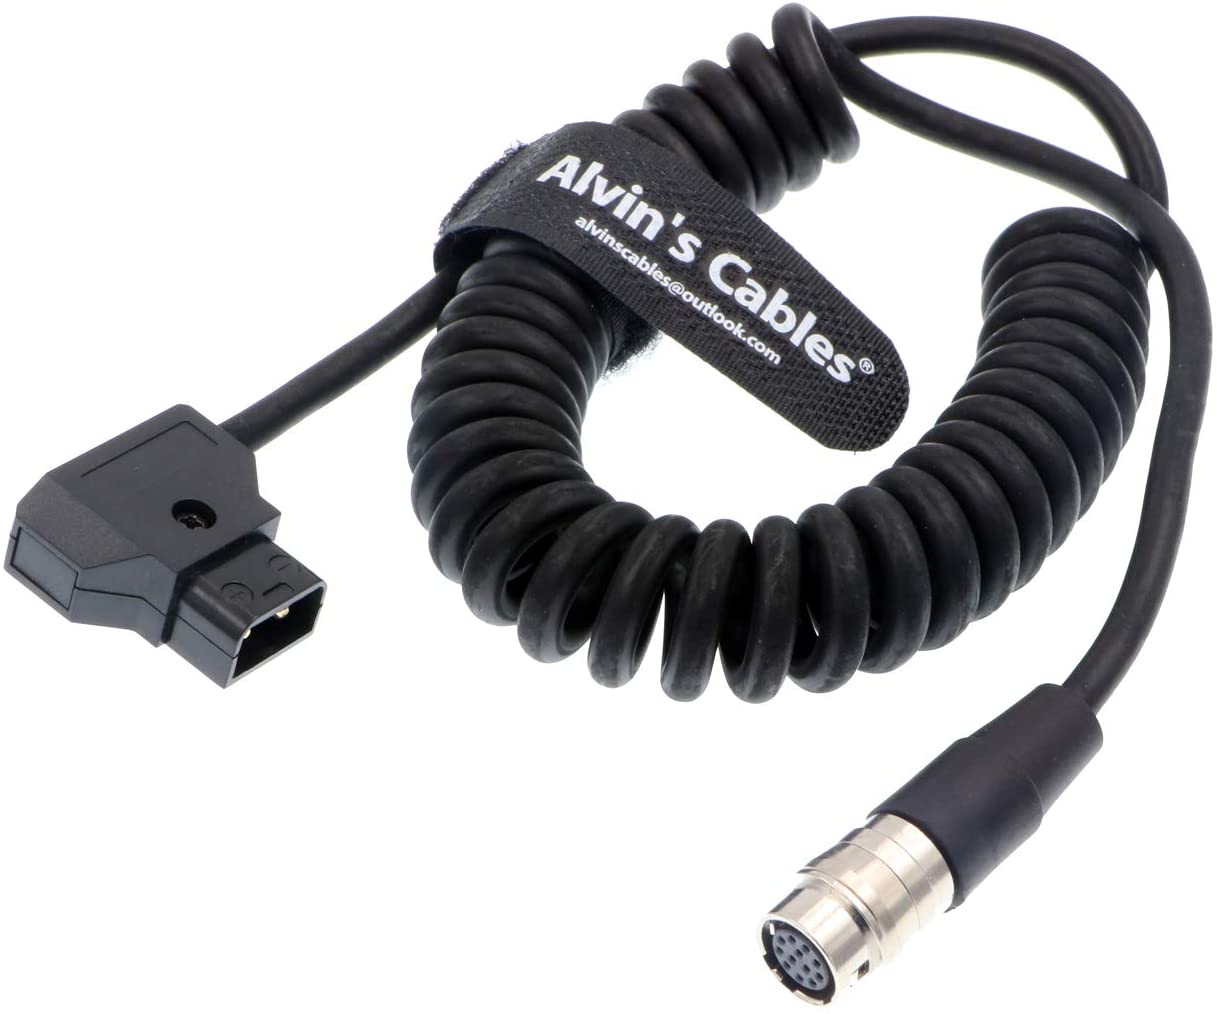 Alvin's Cables 12 Pin Hirose Power Cable for B4 2/3